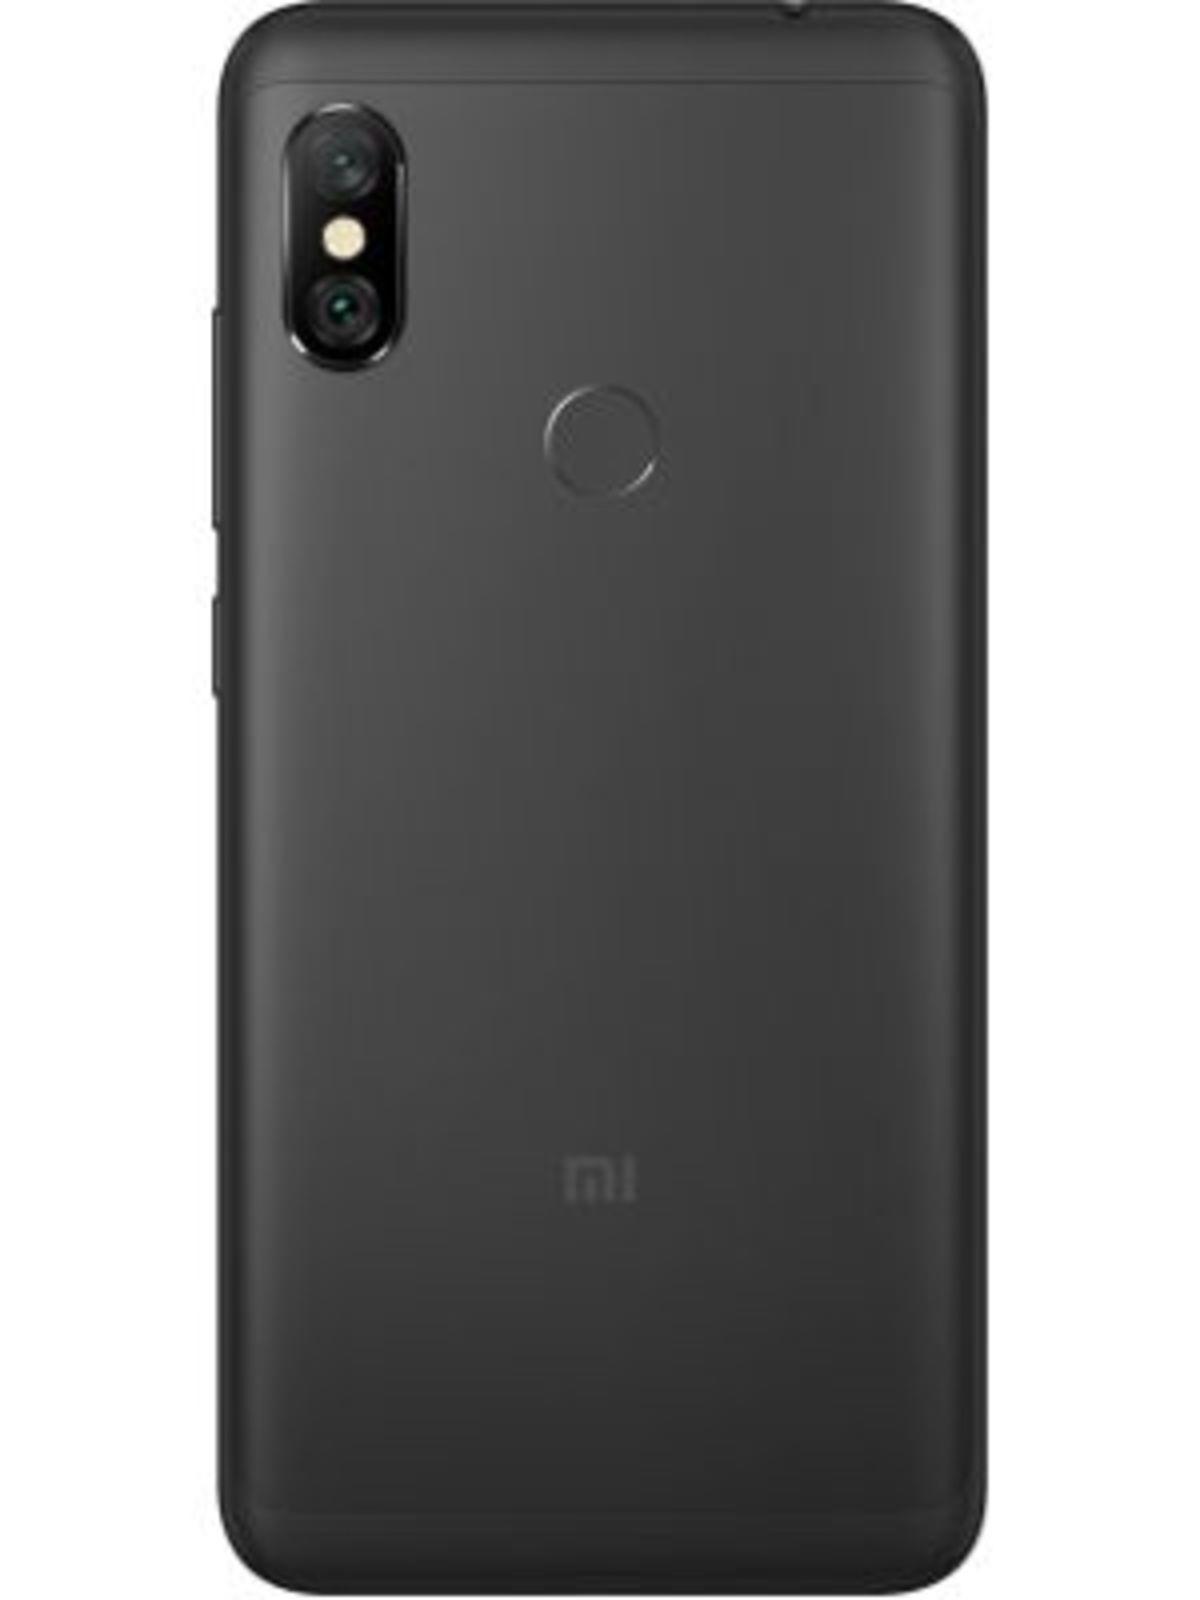 Xiaomi Redmi Note 6 Pro Price In India Full Specifications 25th Mar 22 At Gadgets Now